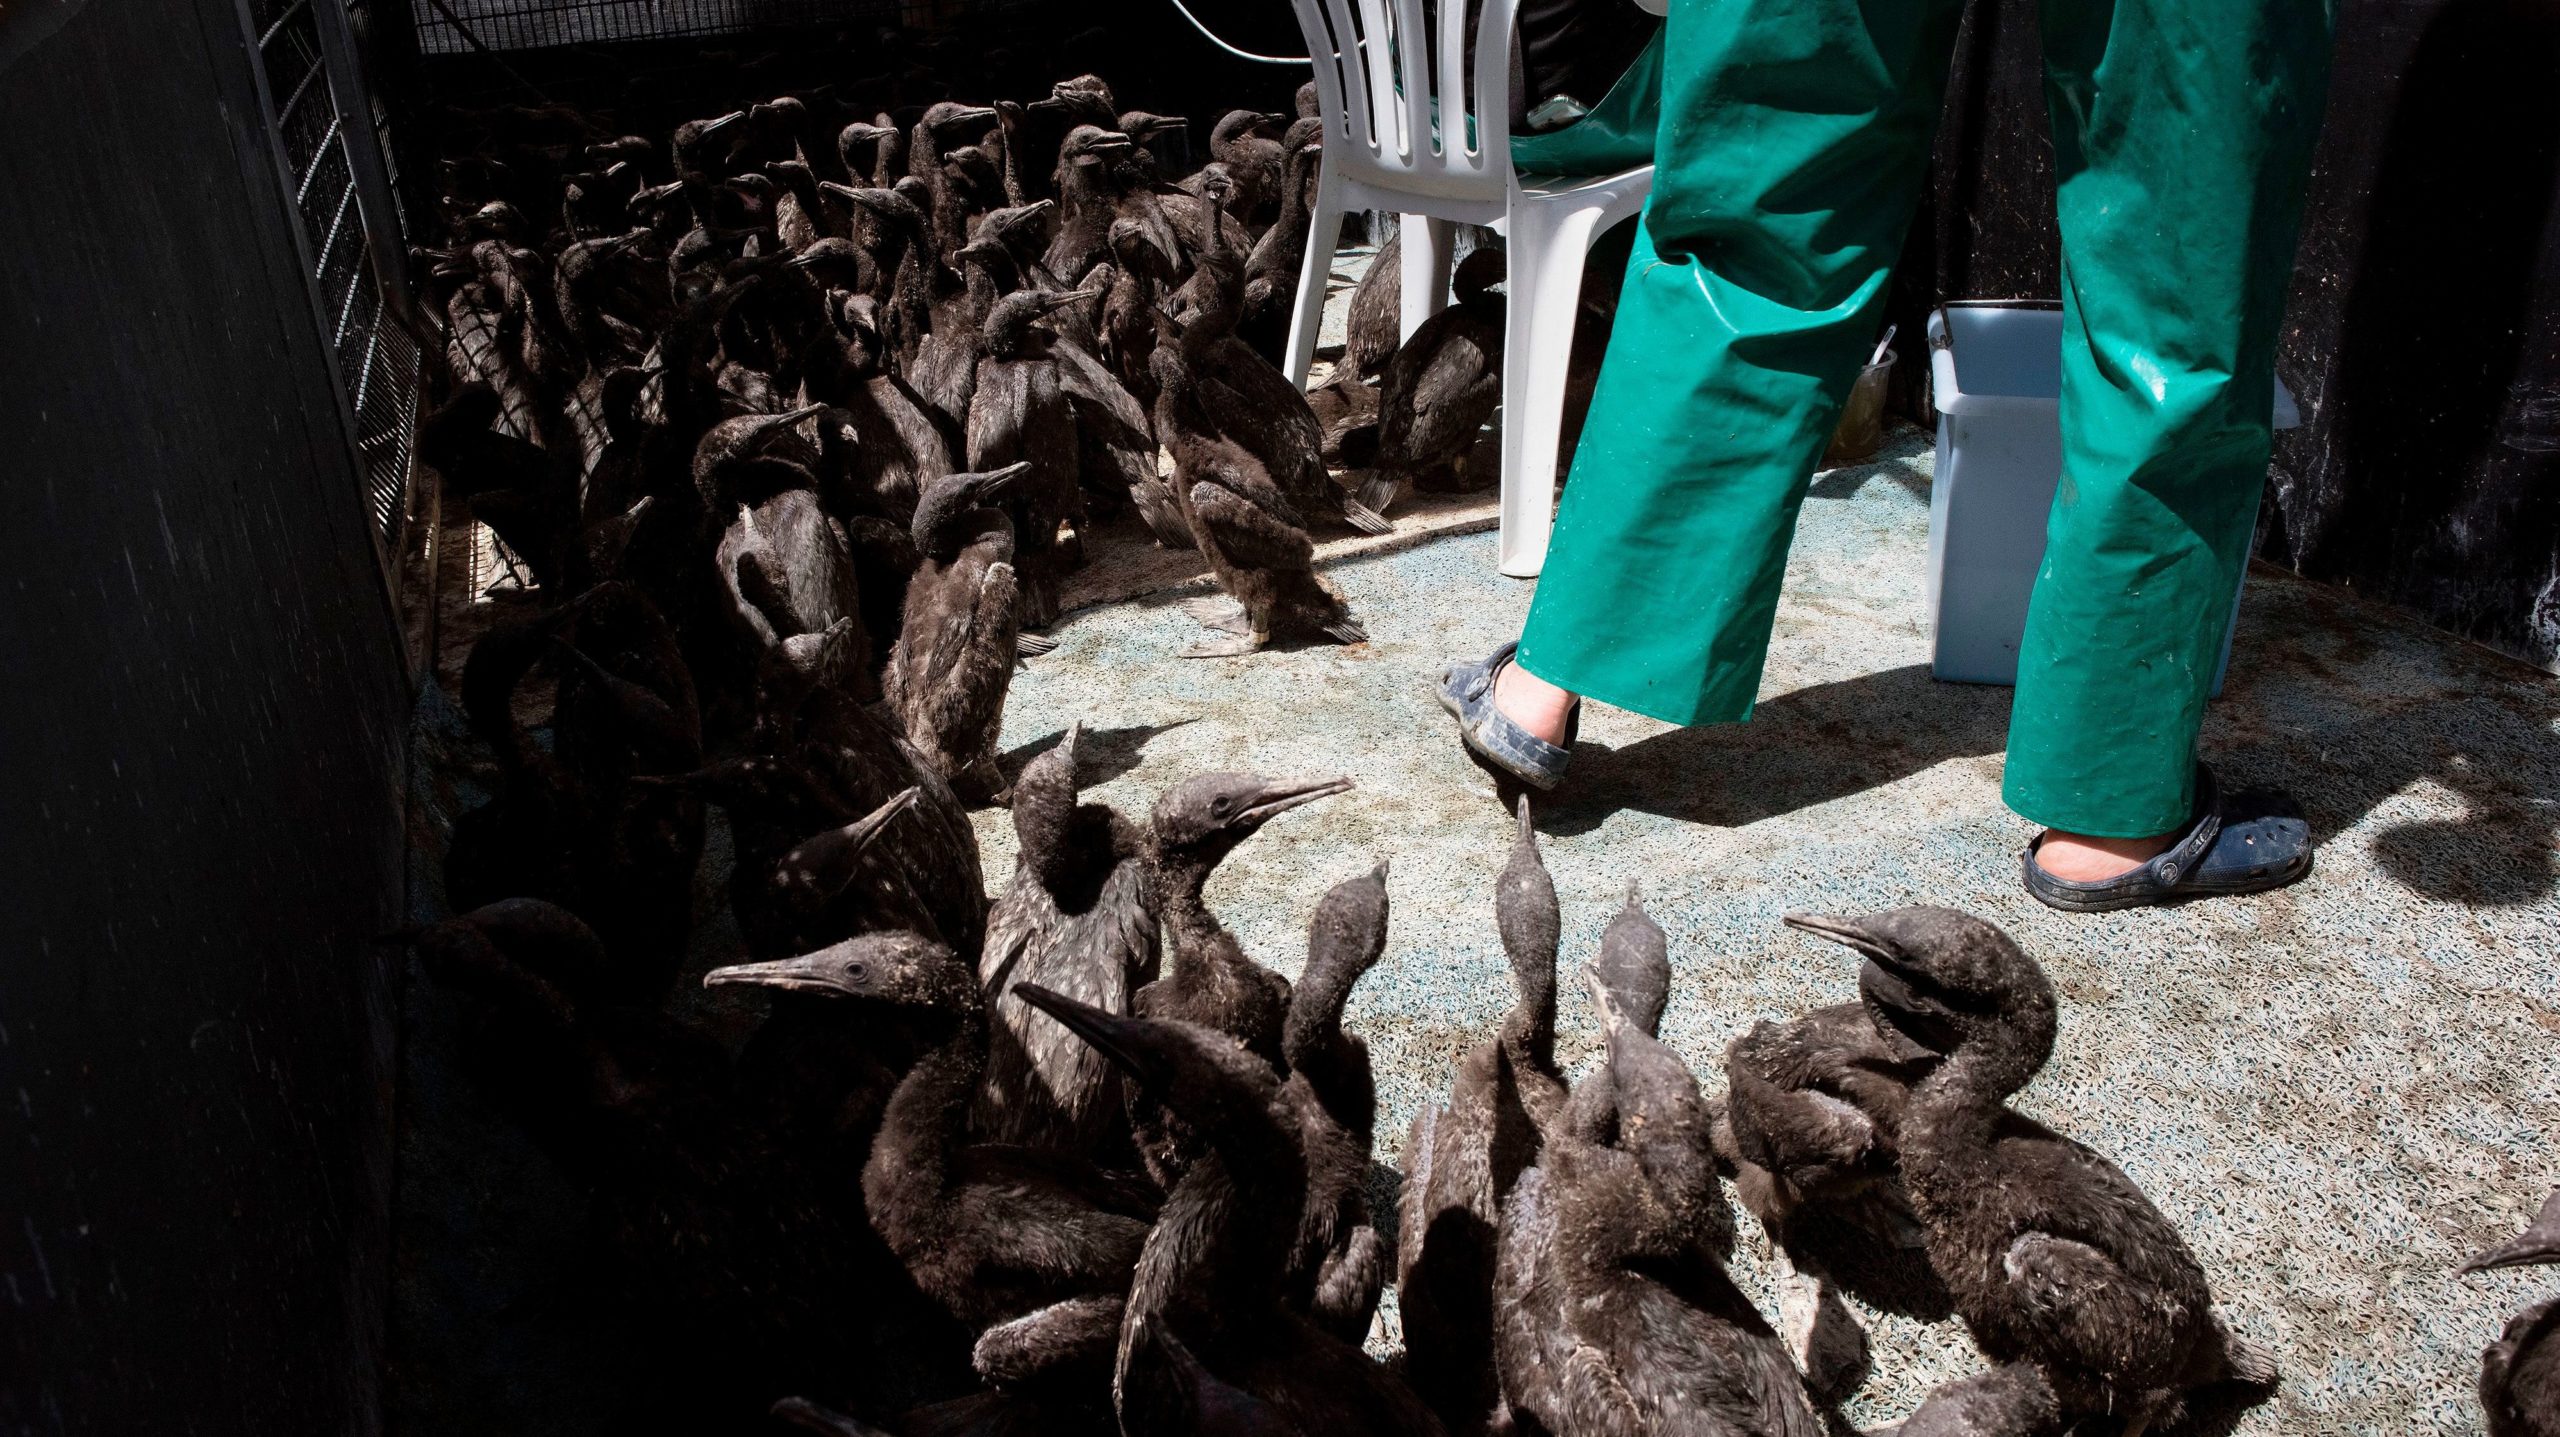 A volunteer cleans out an adjoining enclosure next to some of the Cape cormorant chicks. (Photo: Rodger Bosch / AFP, Getty Images)